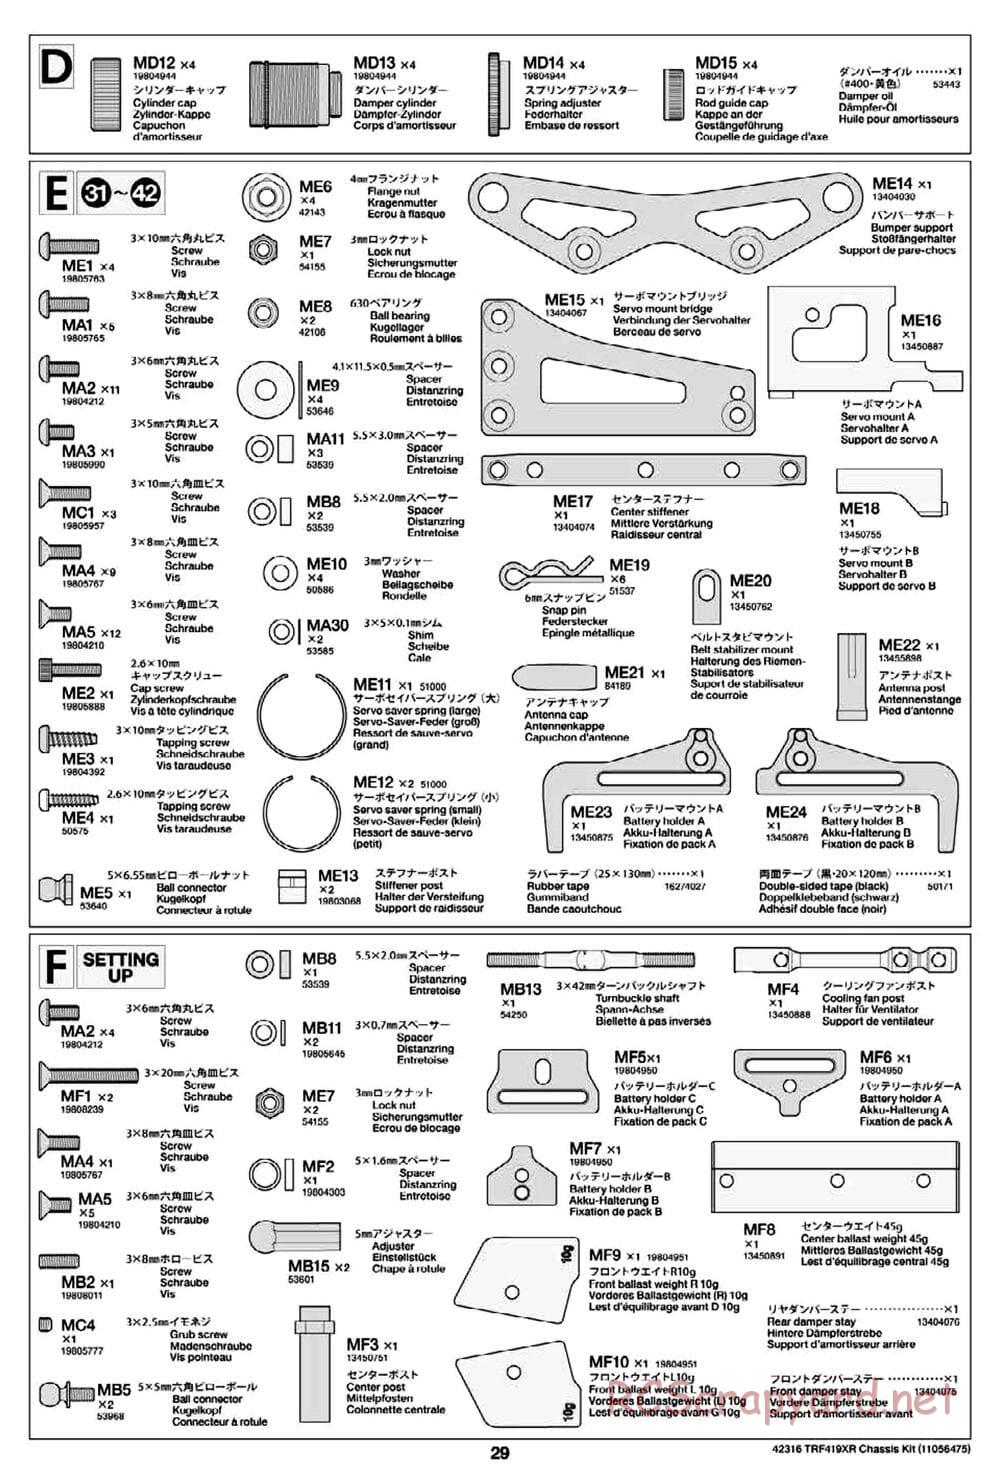 Tamiya - TRF419XR Chassis - Manual - Page 29